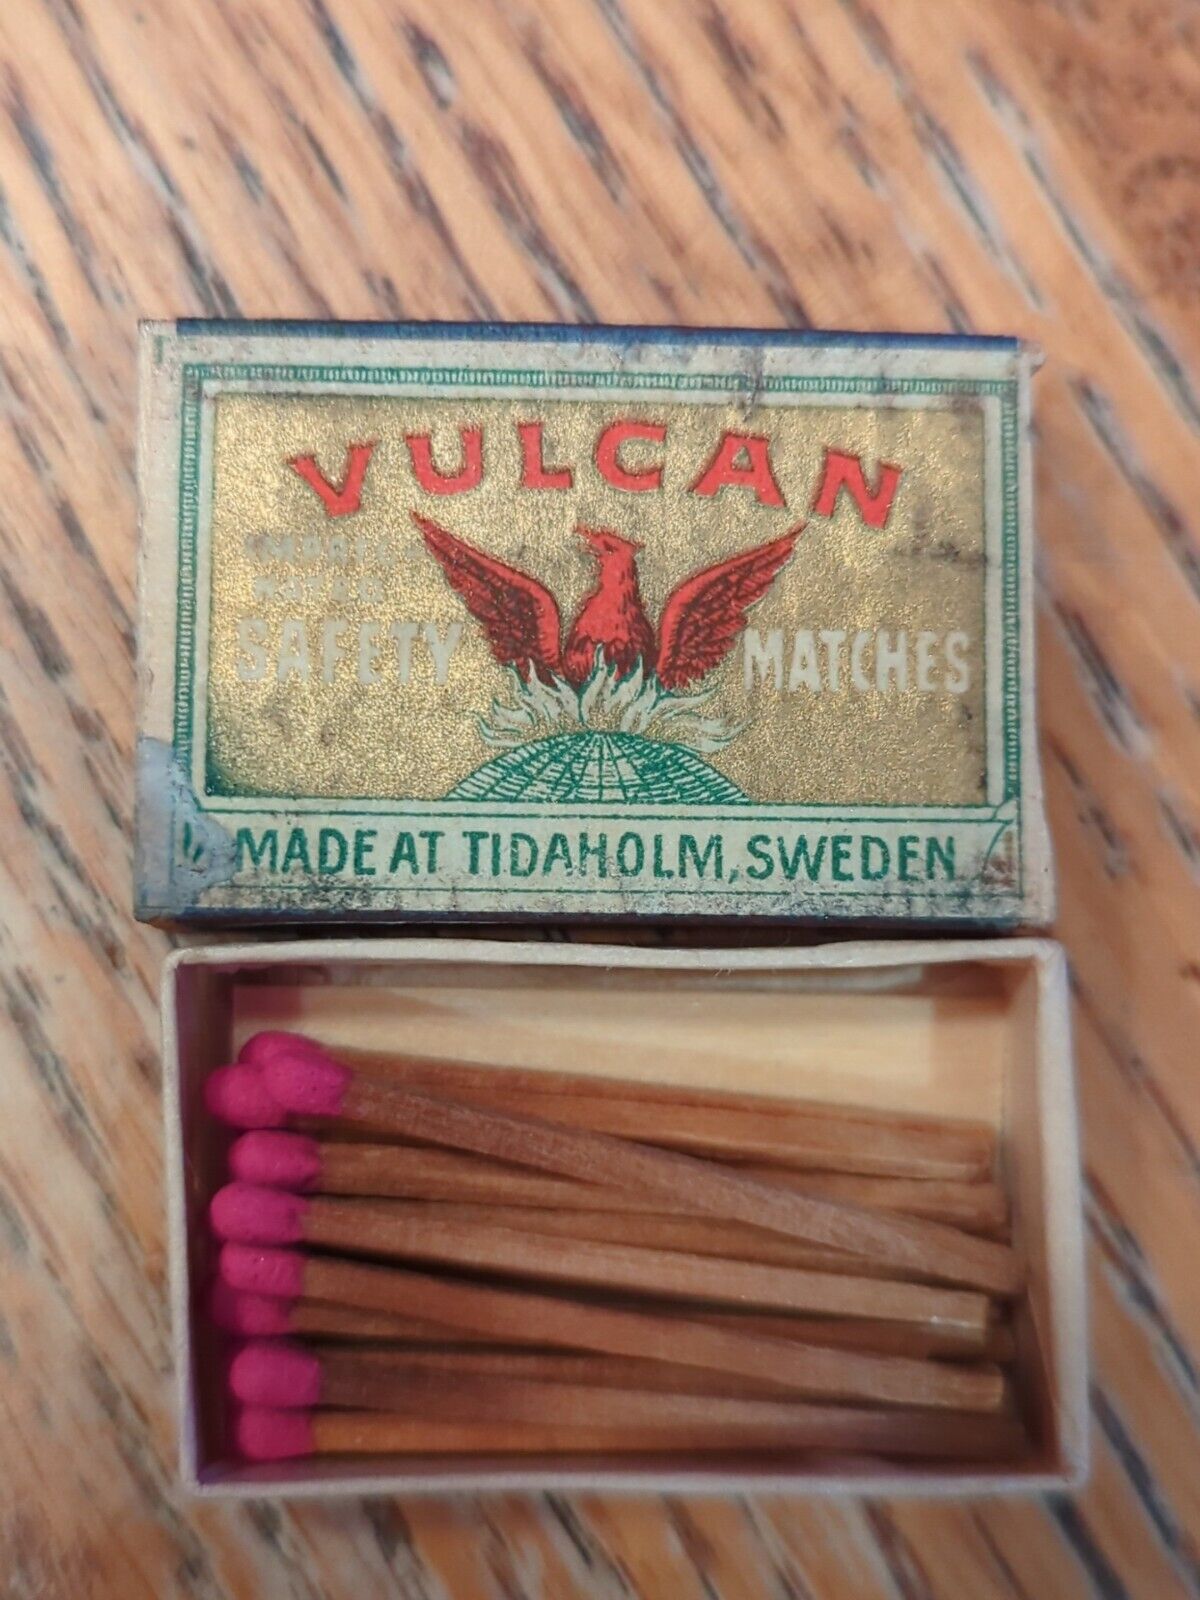 Vintage Vulcan Safety Matches Made At Tidaholm Sweden